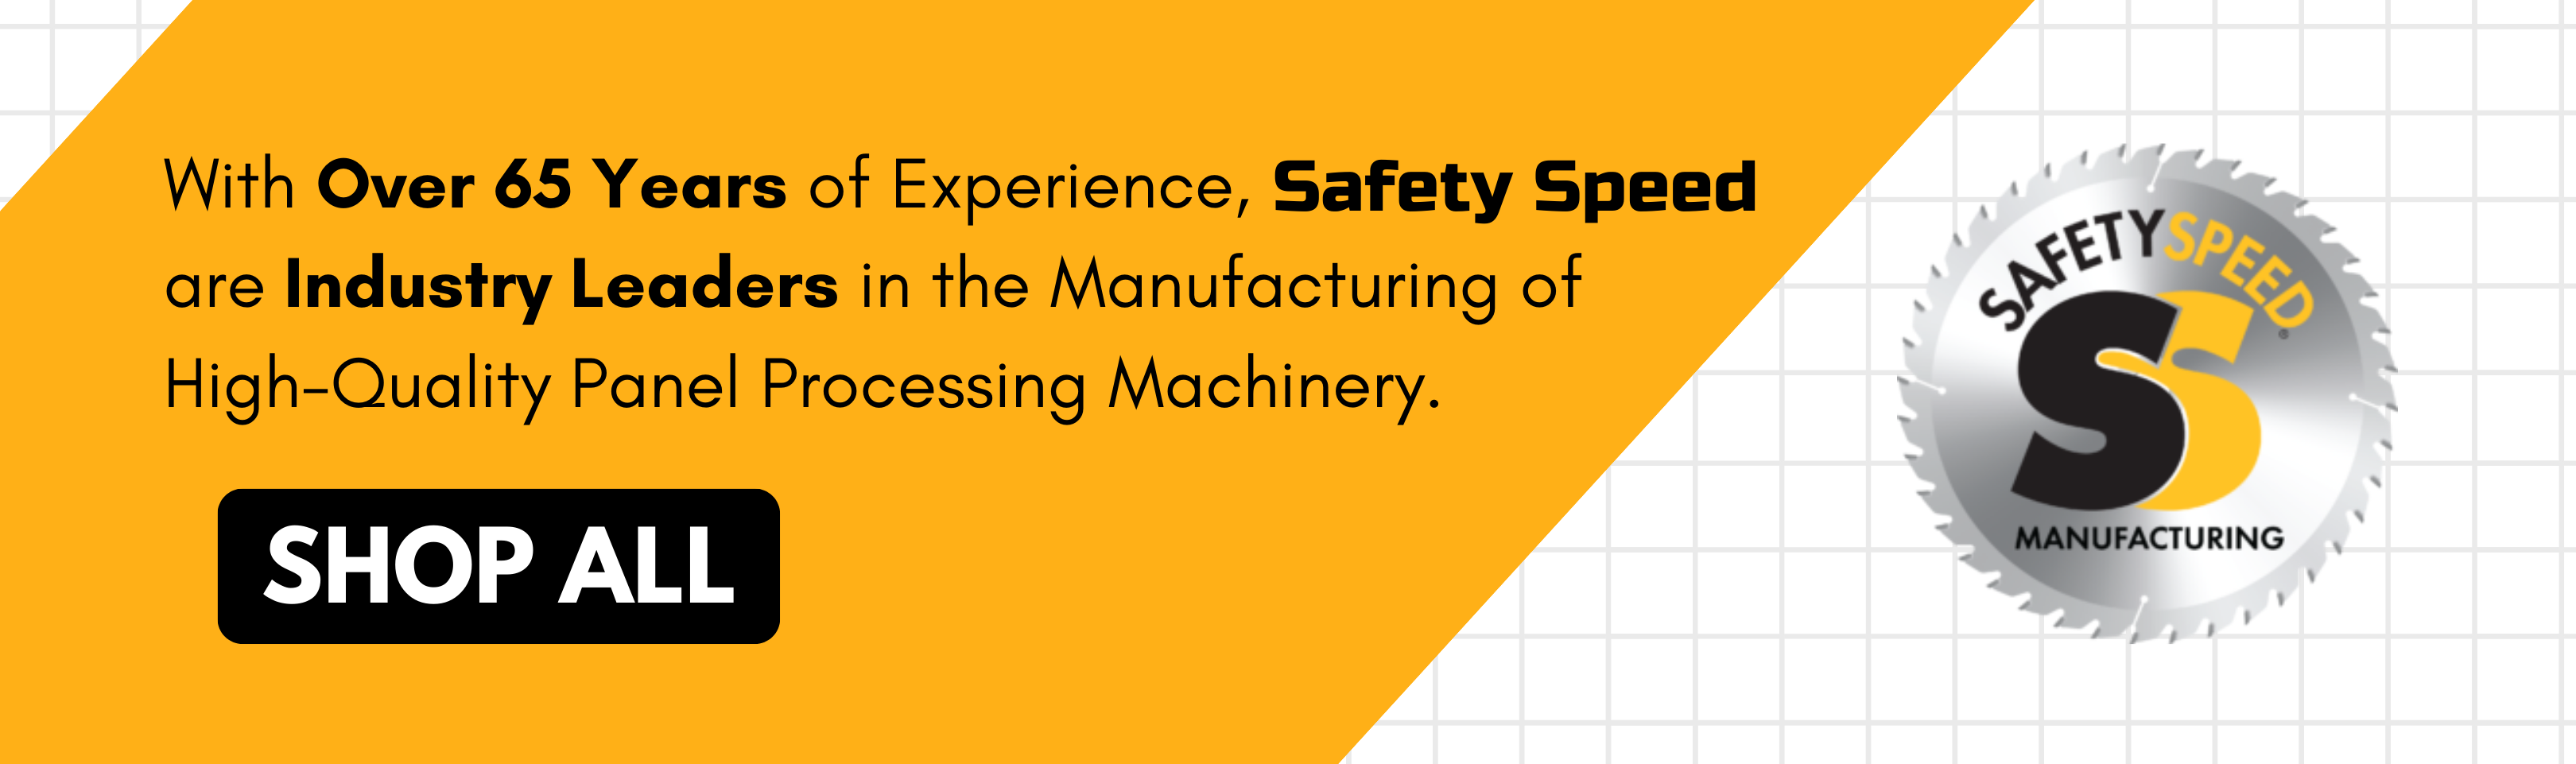 Safety Speed has over 65 years of experience, making them an industry leader in the manufacturing of high-quality panel processing machinery.